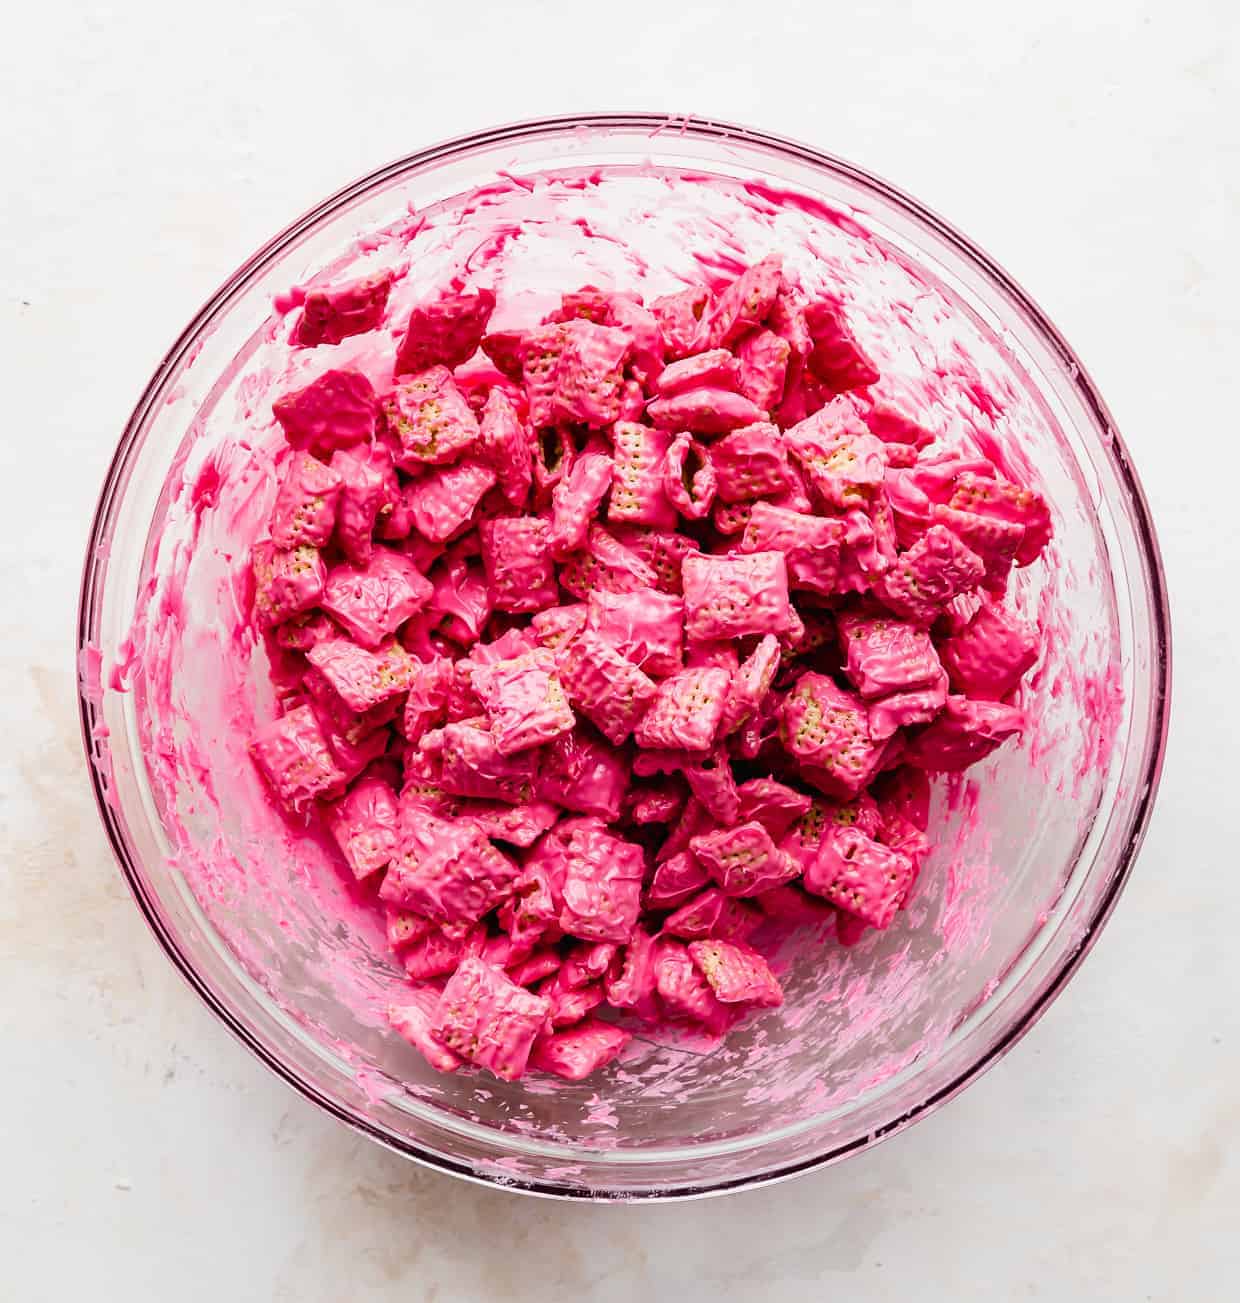 Bright pink covered Chex cereal in a glass bowl.